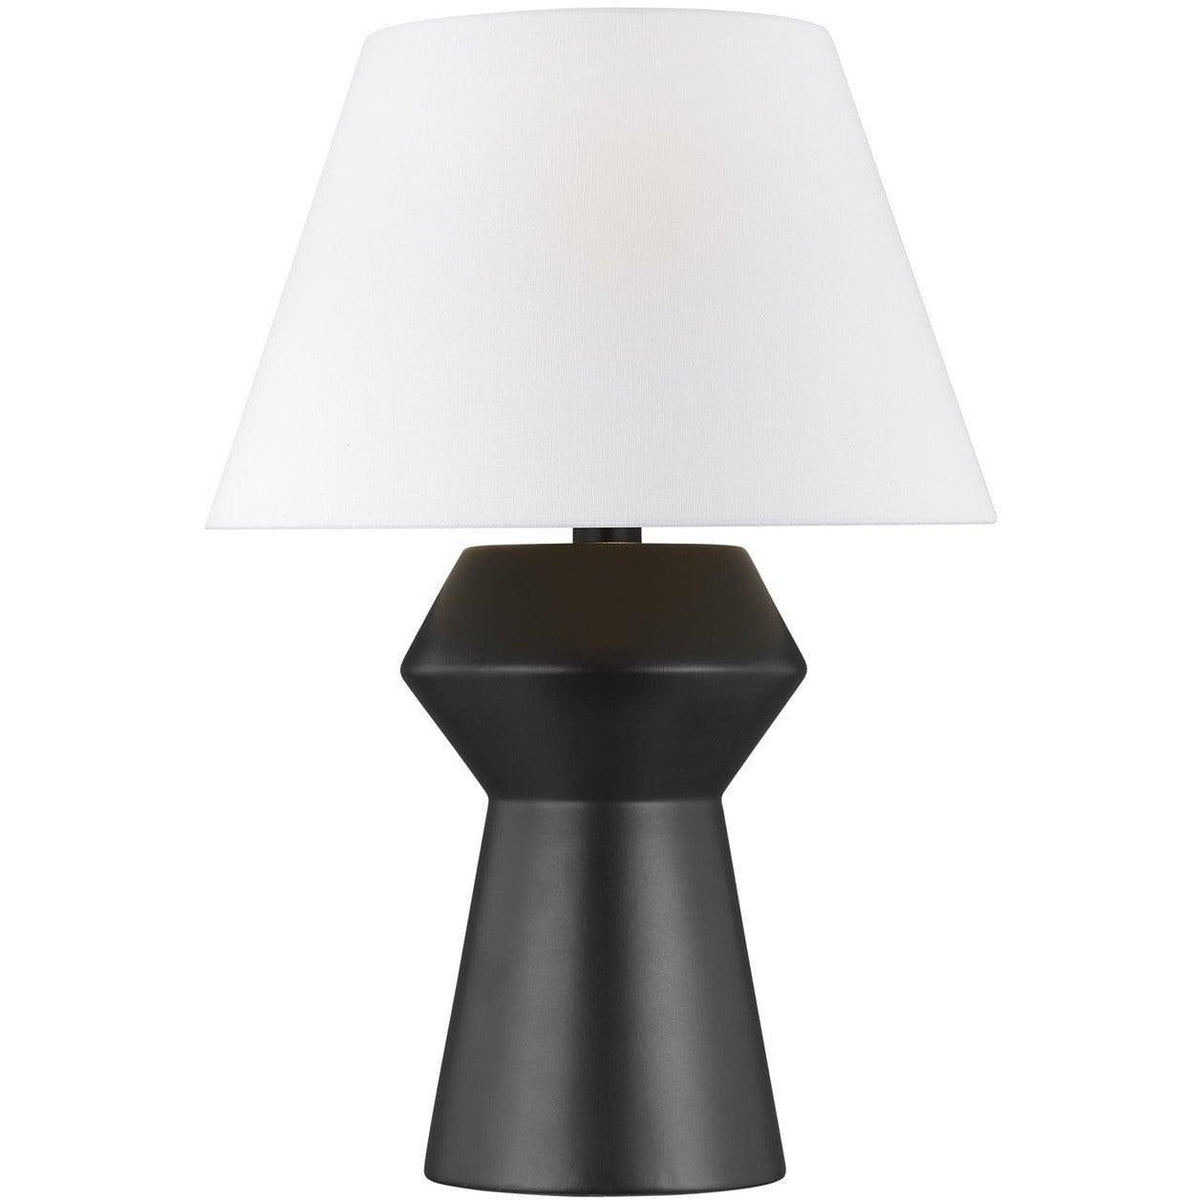 Visual Comfort Studio Collection - Abaco Inverted Table Lamp - CT1061COLAI1 | Montreal Lighting & Hardware